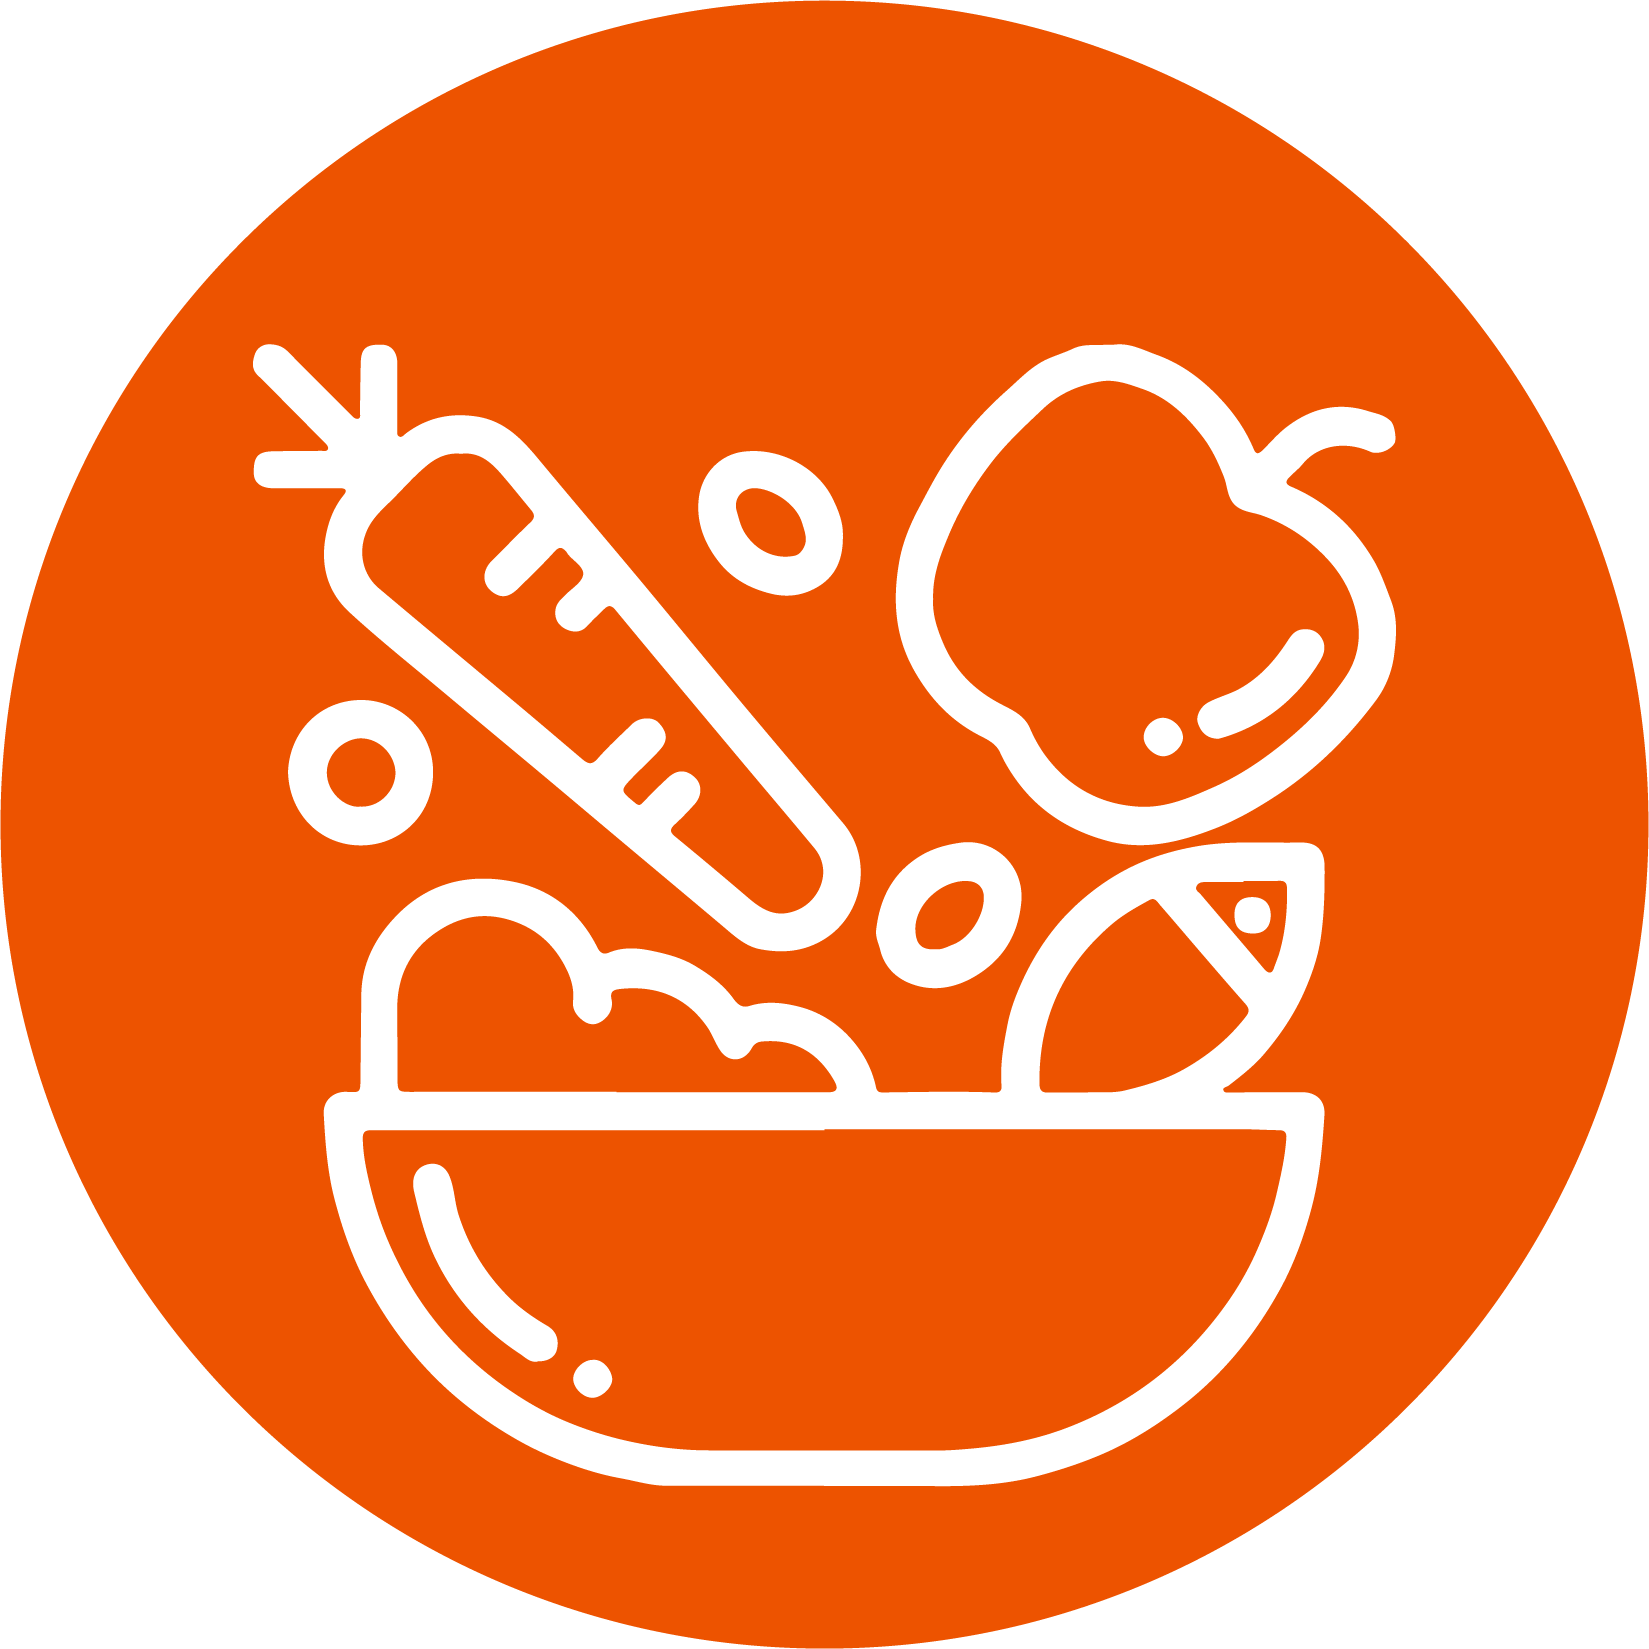 Image icon representing nutrition and food safety